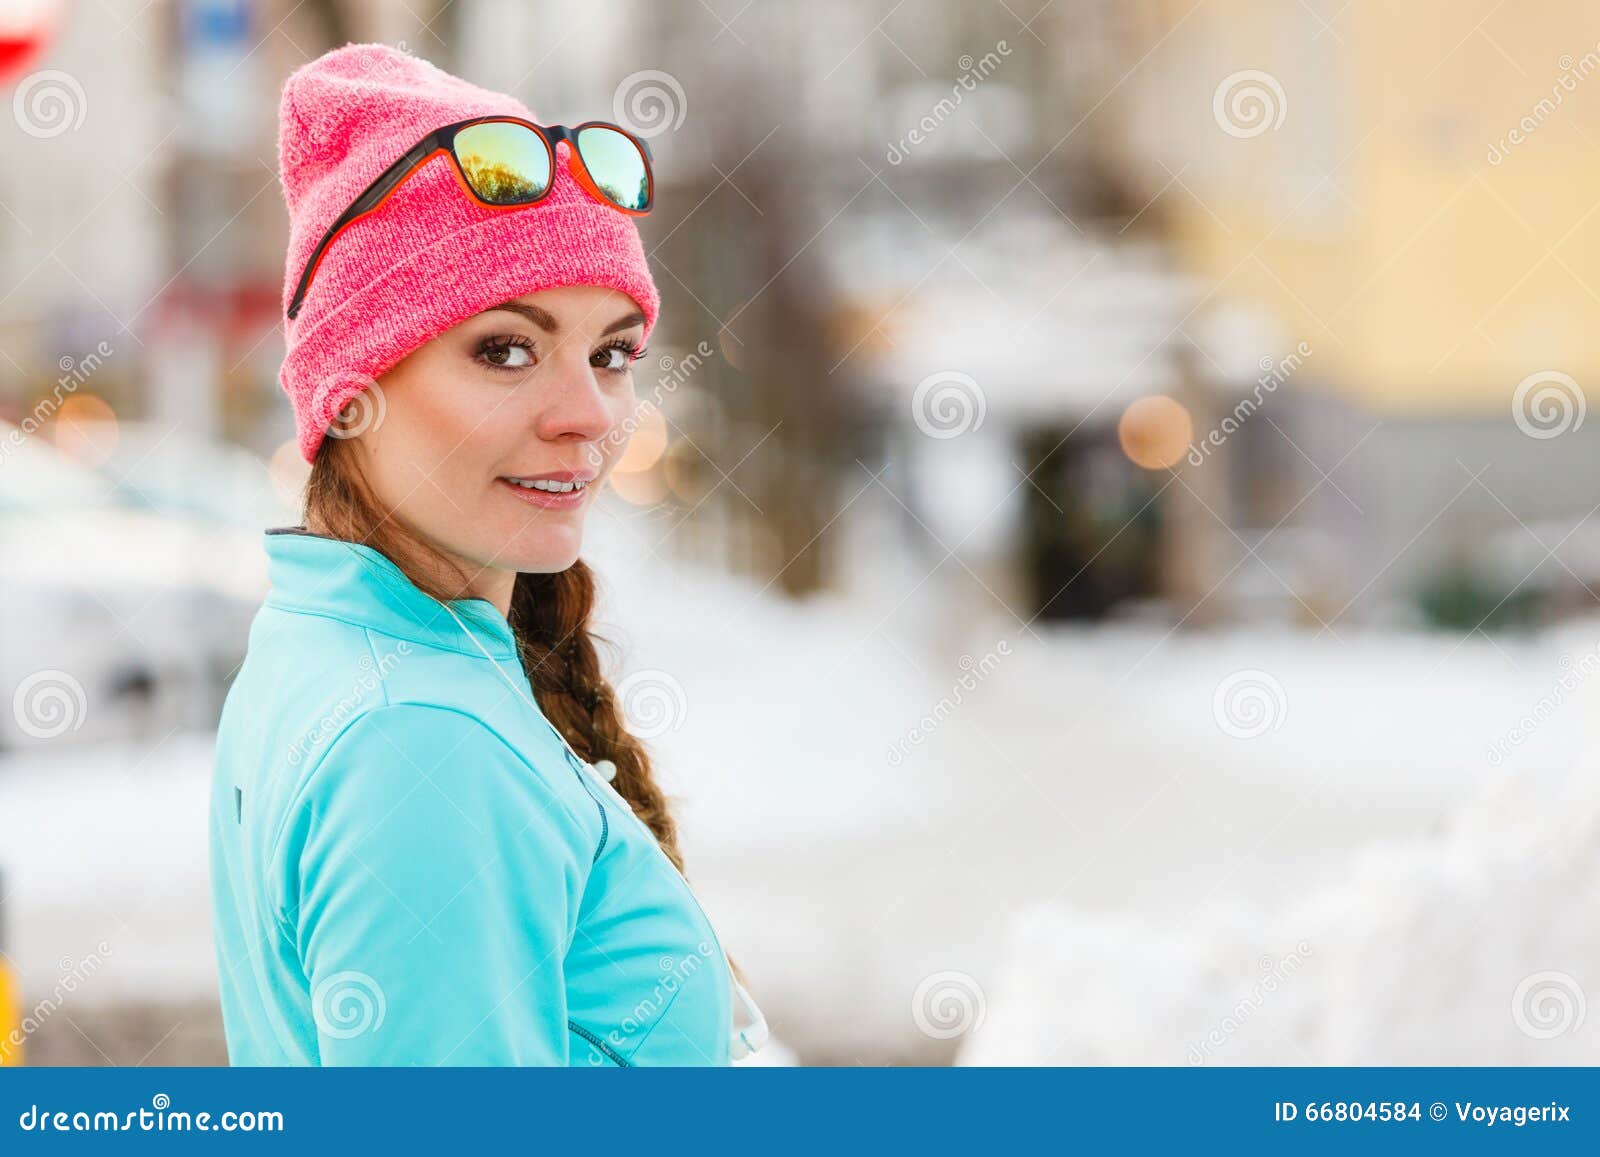 female fitness sport model outdoor in cold winter weather royalty